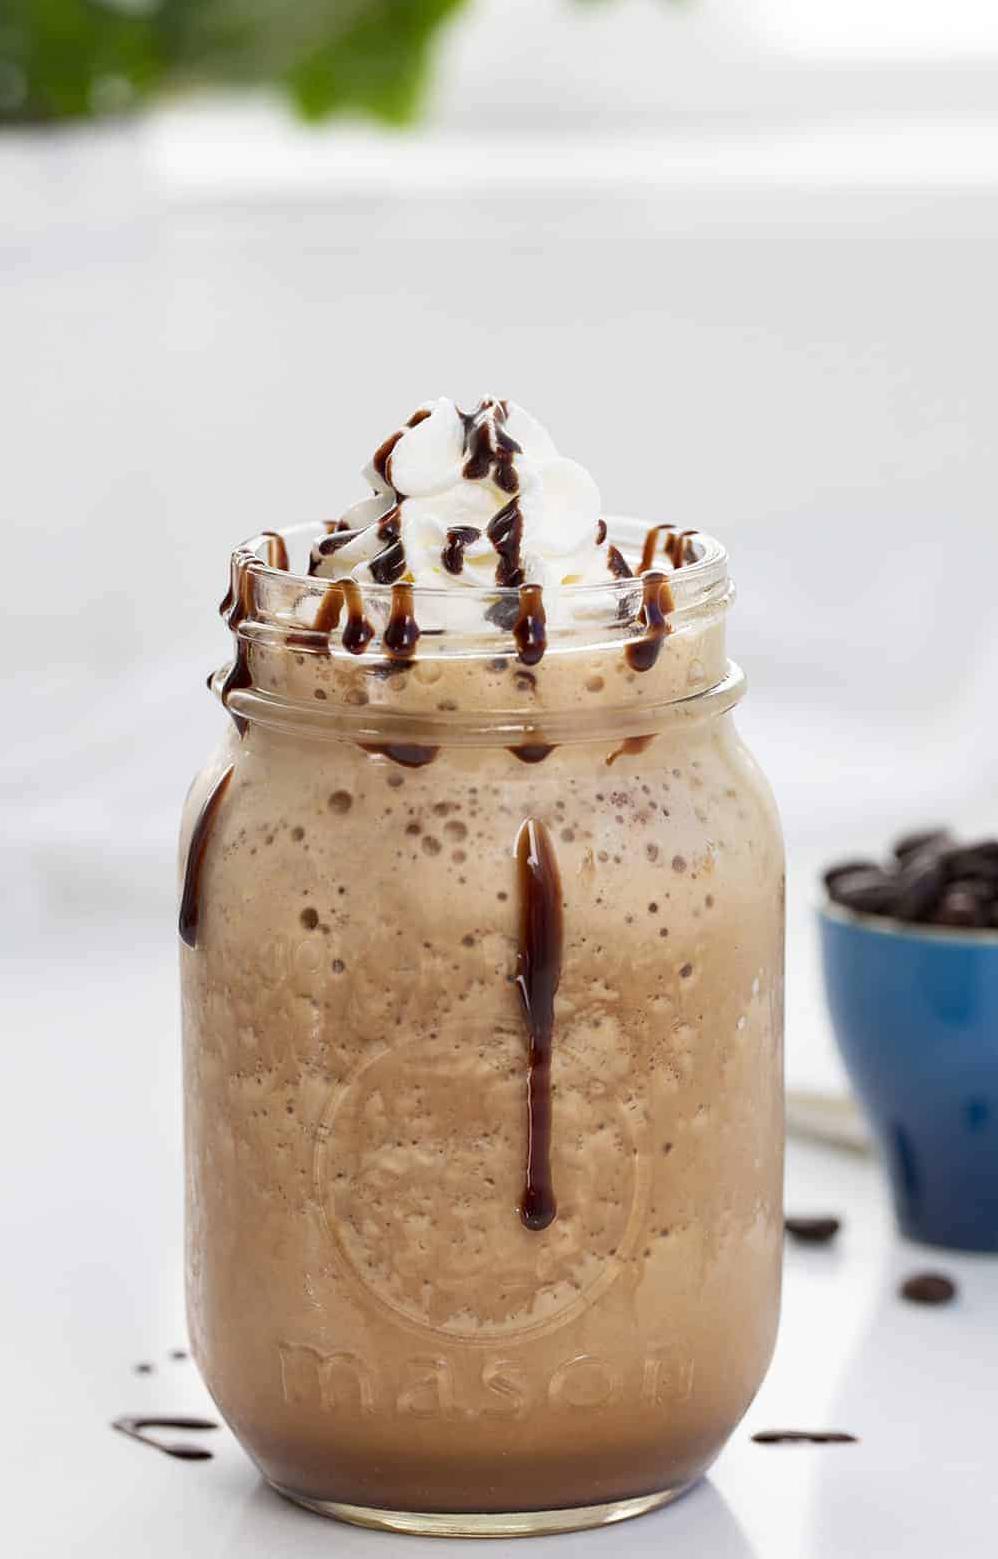  Indulge in the decadent blend of espresso, chocolate and cream with every sip!